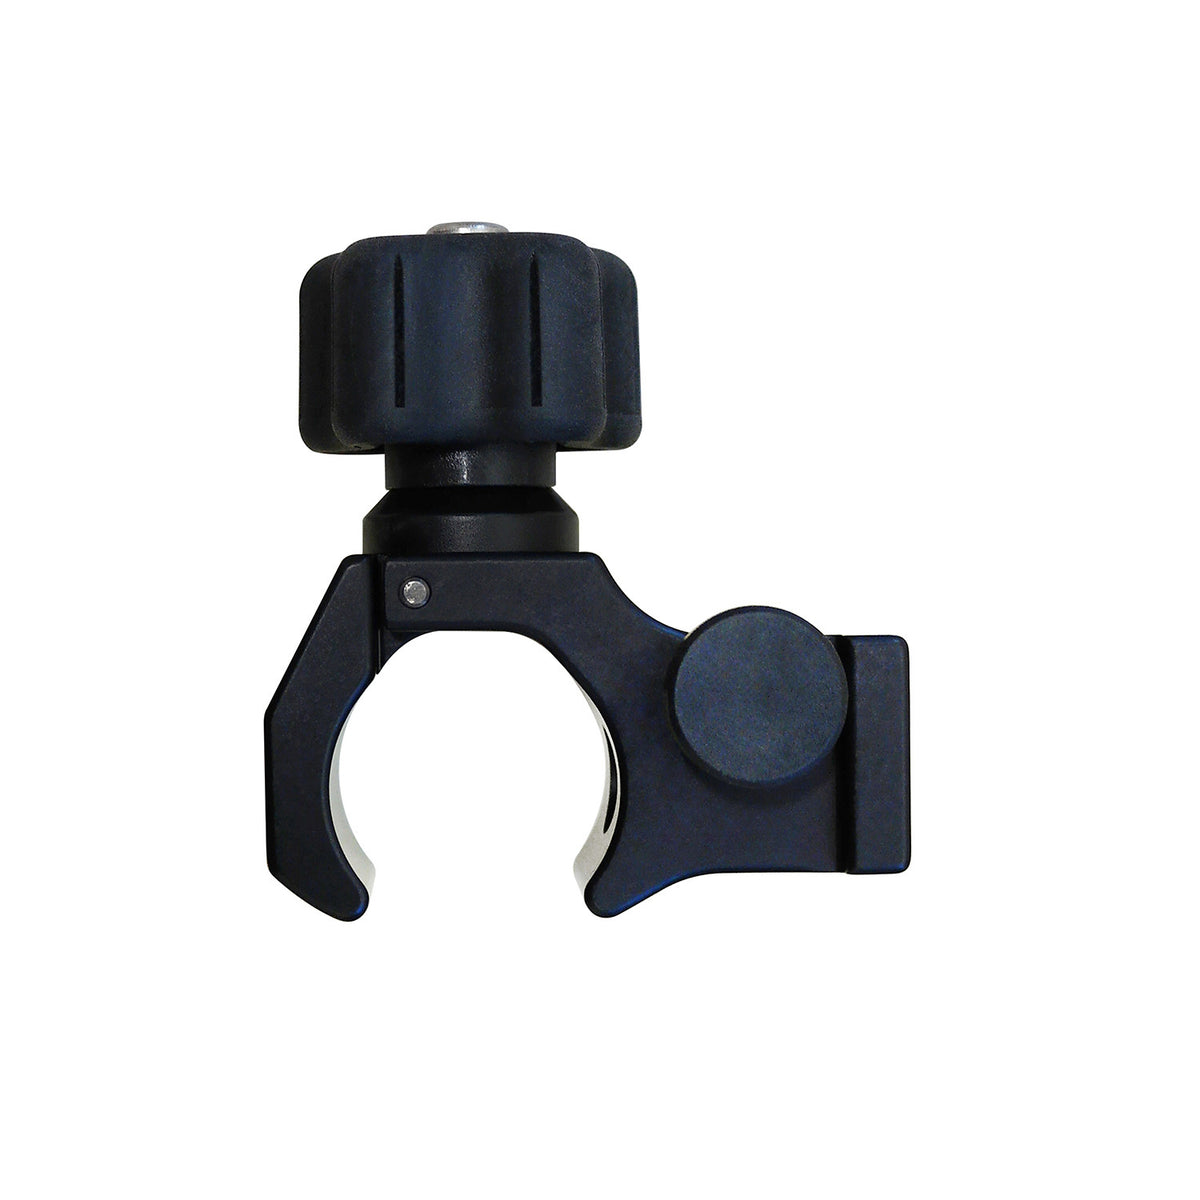 SECO Claw Series Pole Clamp for 1-1/4" OD Poles -Brackets, Cradles & Pole Clamps- eGPS Solutions Inc.